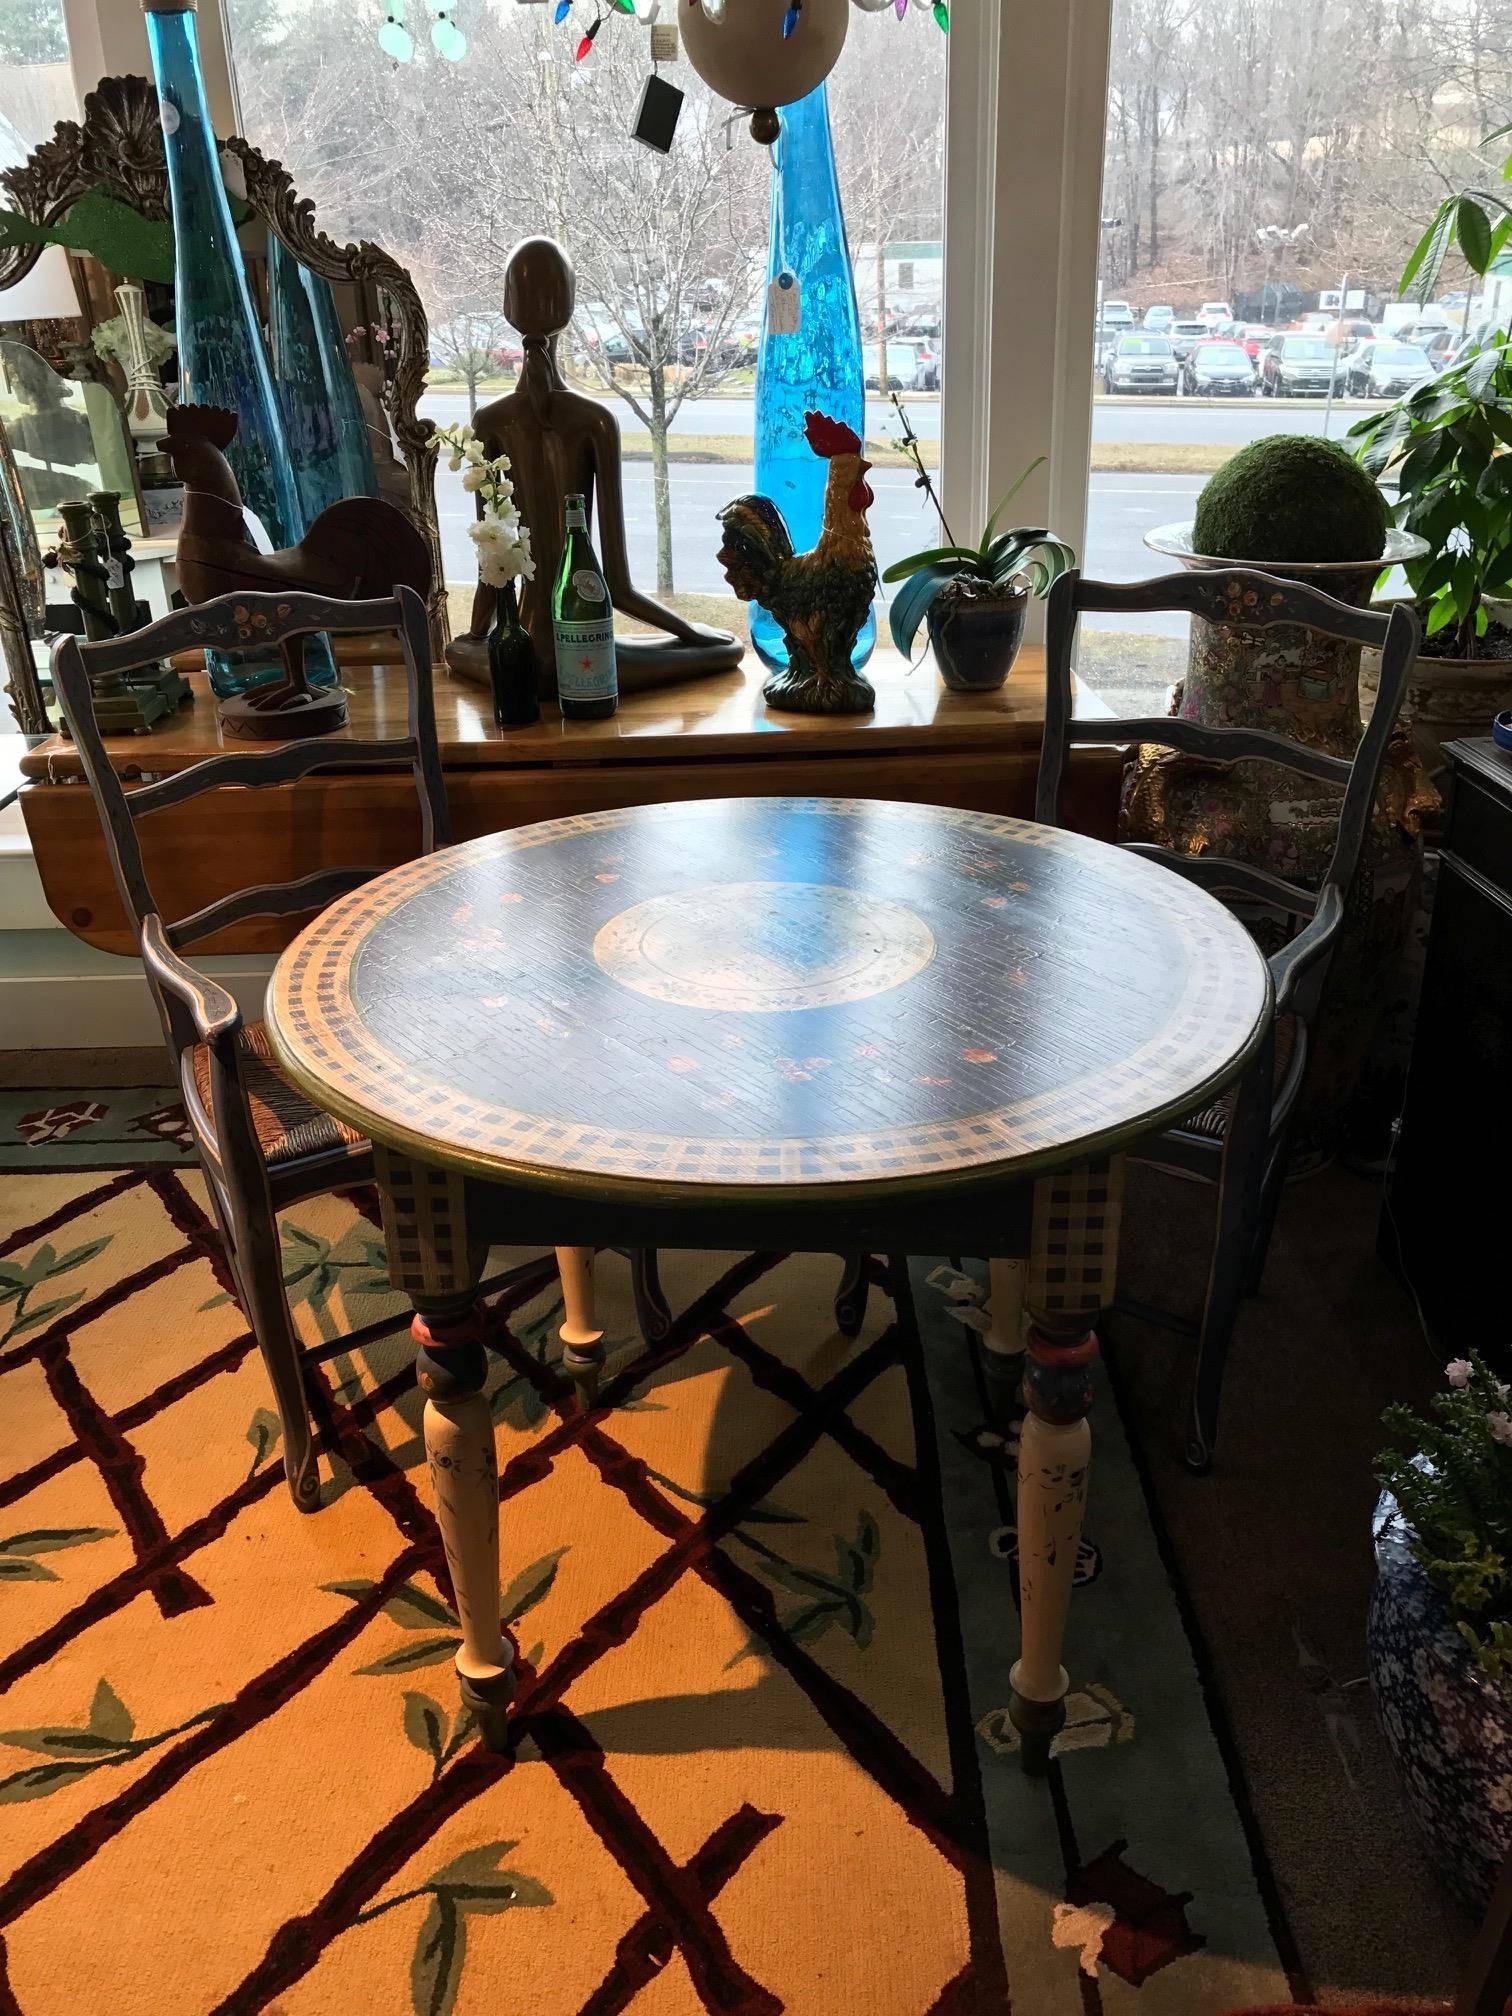 Fabulous shabby chic hand-painted Persian blue breakfast table and two chairs, shabby chic or farmhouse at it's finest. Little roses and vines adorn this uniquely pretty table and chairs.

Dimensions:
H 37 x L 21 x D 17.5 x SH 17.